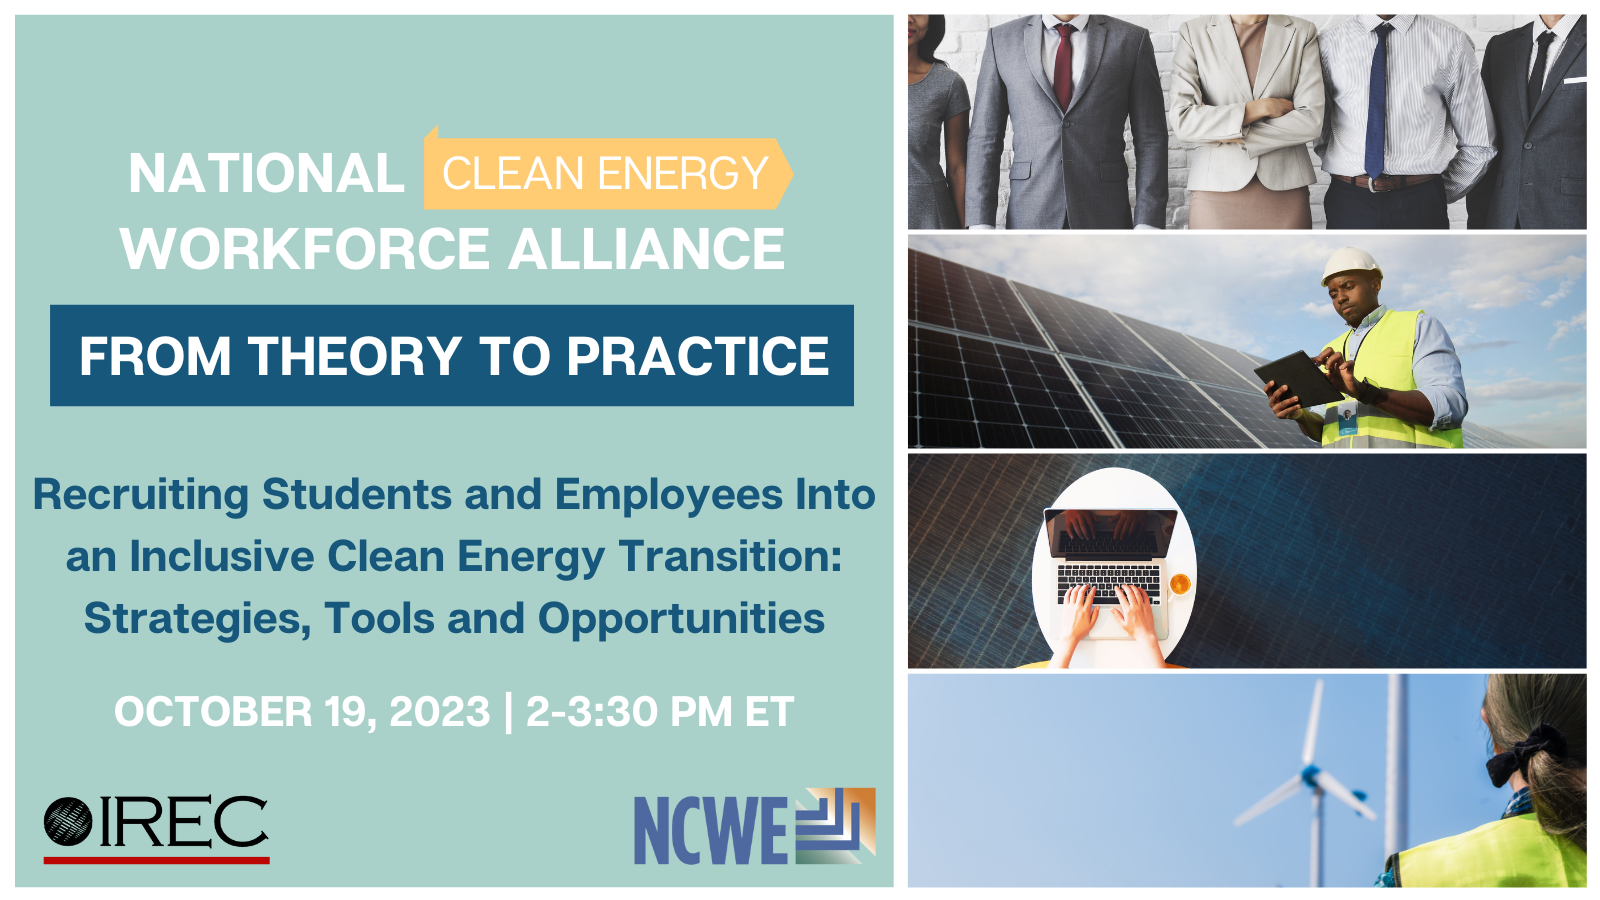 Recruiting Students and Employees into an Inclusive Clean Energy Transition: Strategies, Tools and Opportunities for Participants Webinar 10/19/23